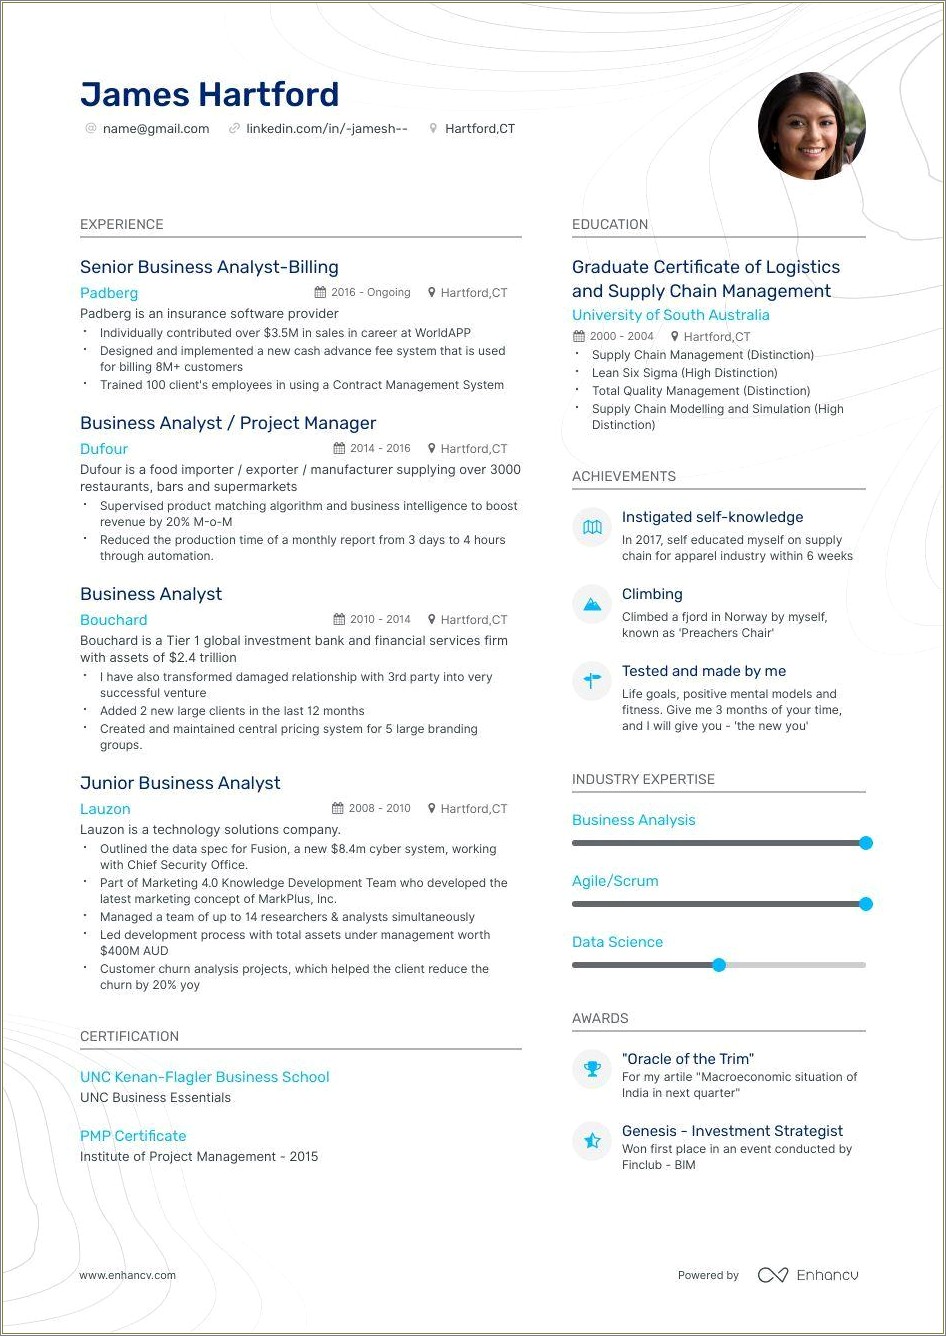 Connecticut Initial Educator Certificate On Resume Example